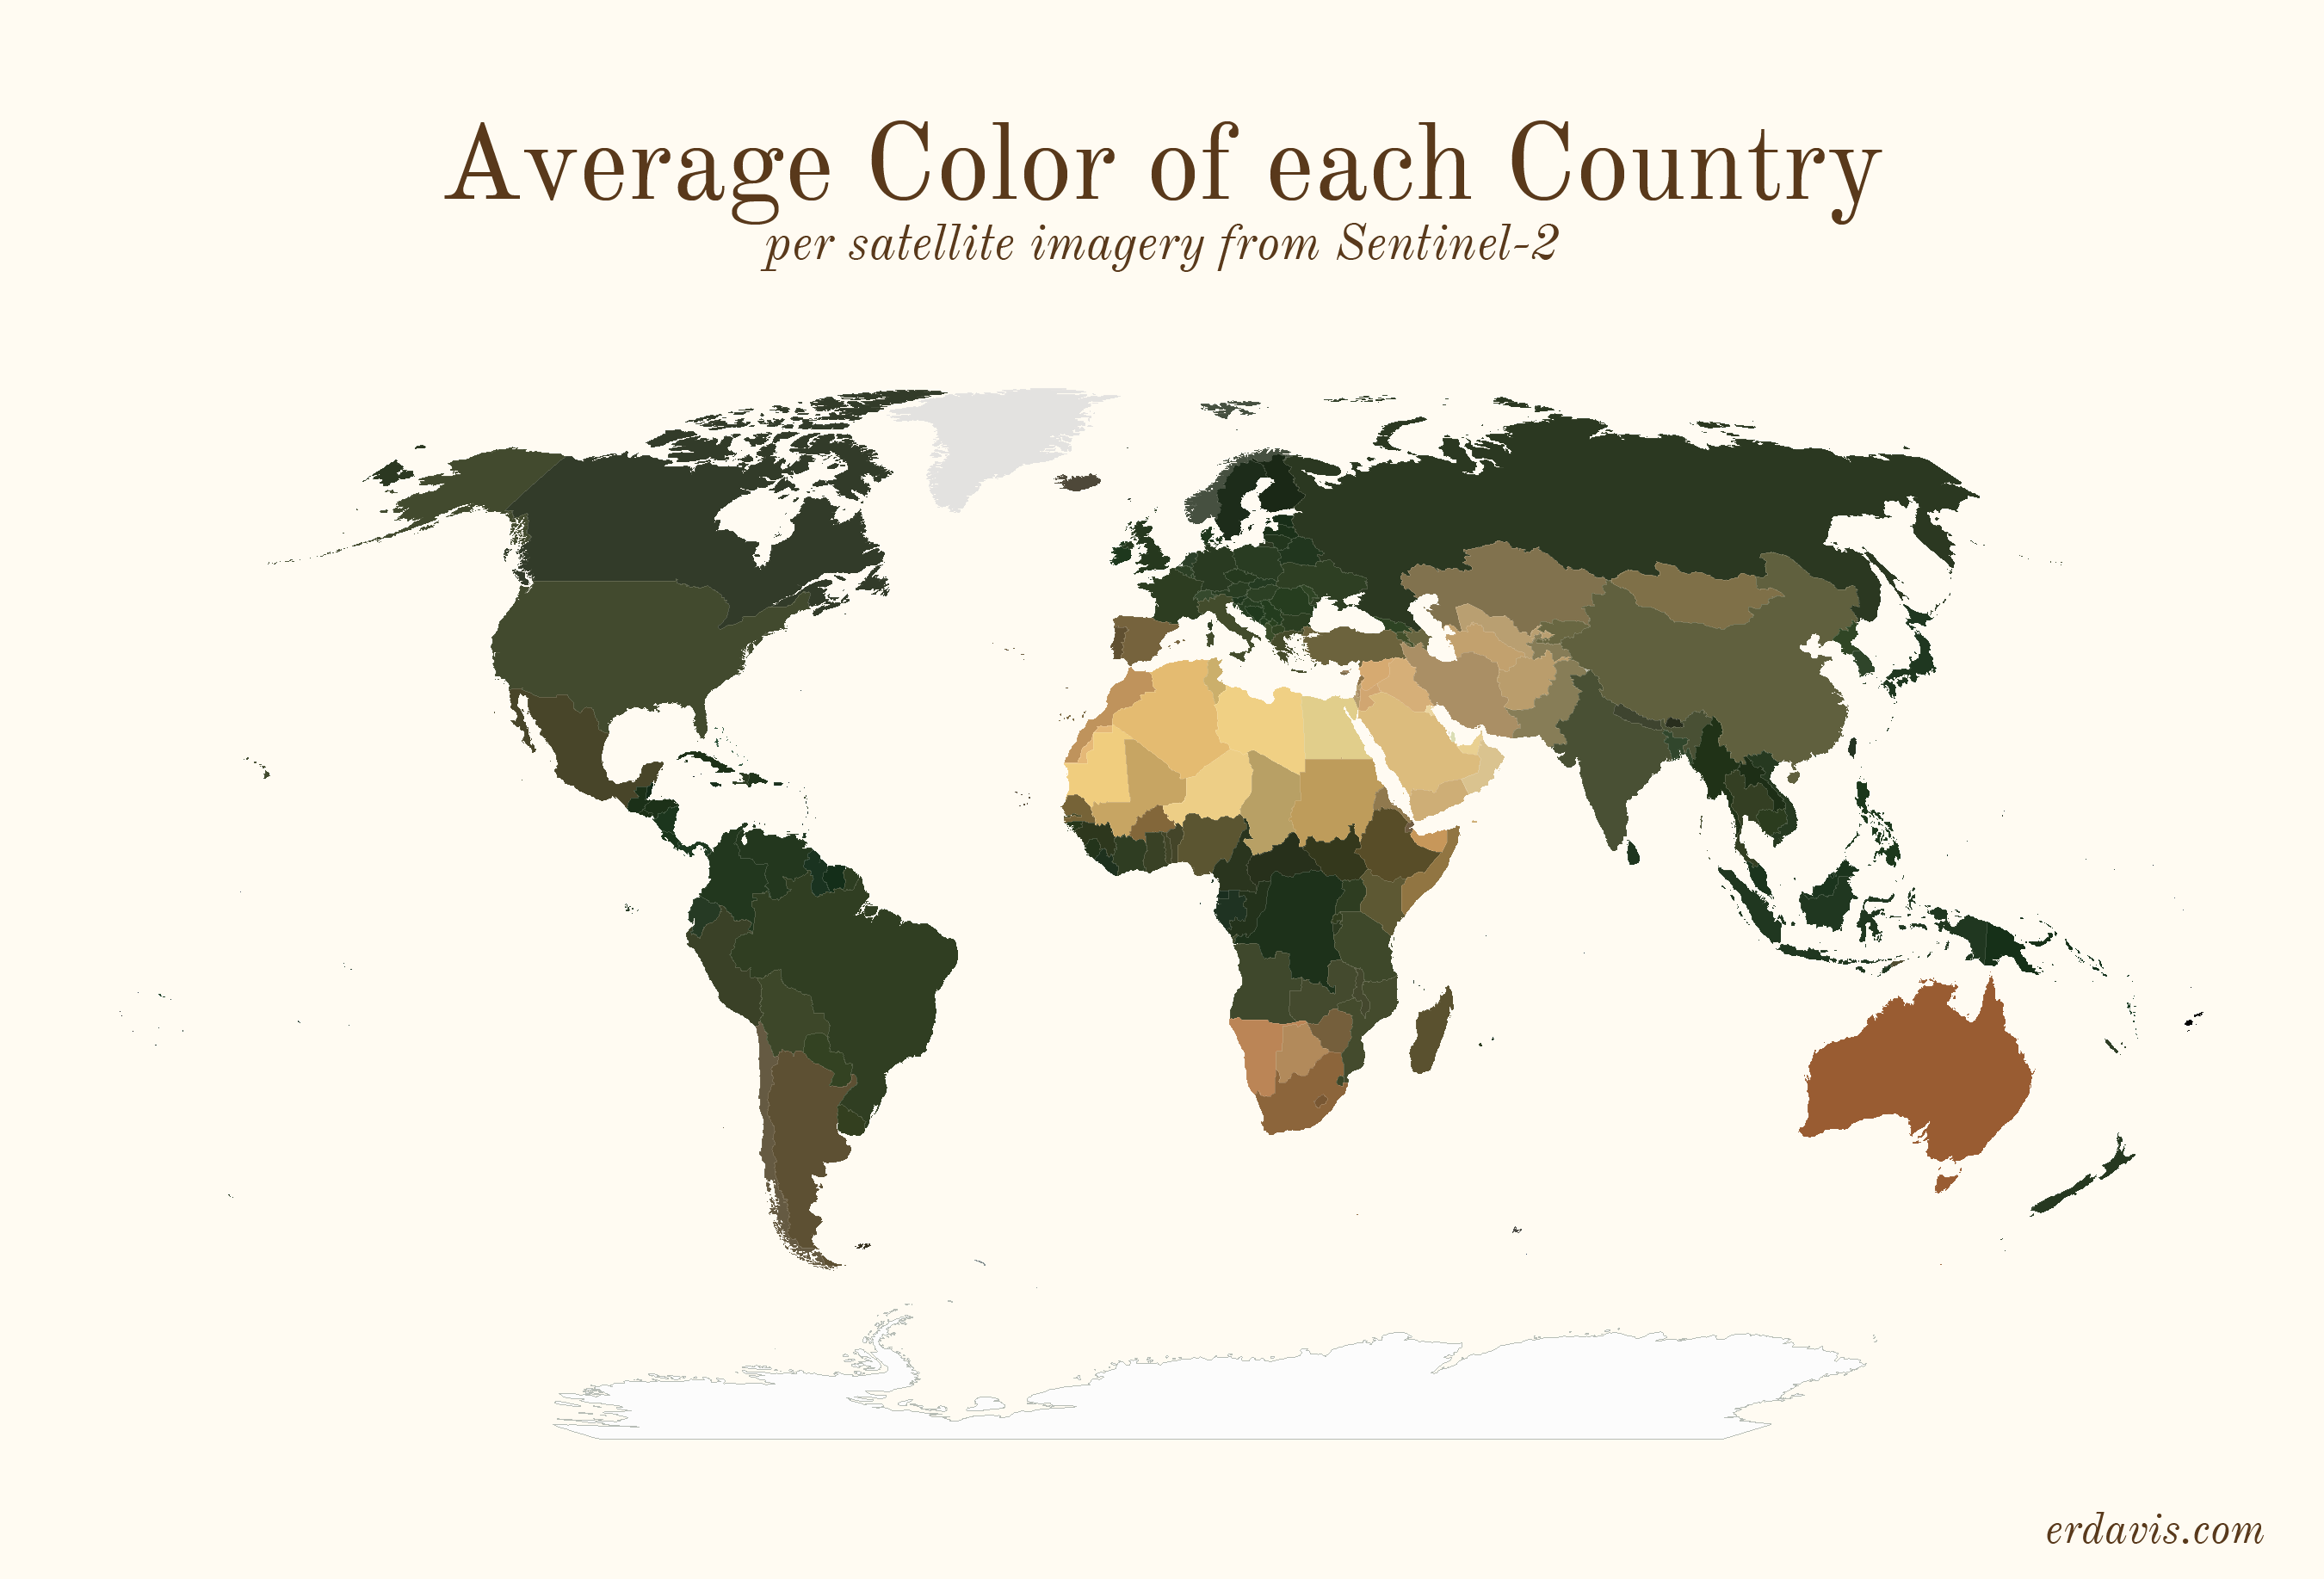 Average color of each country (using satellite imagery)